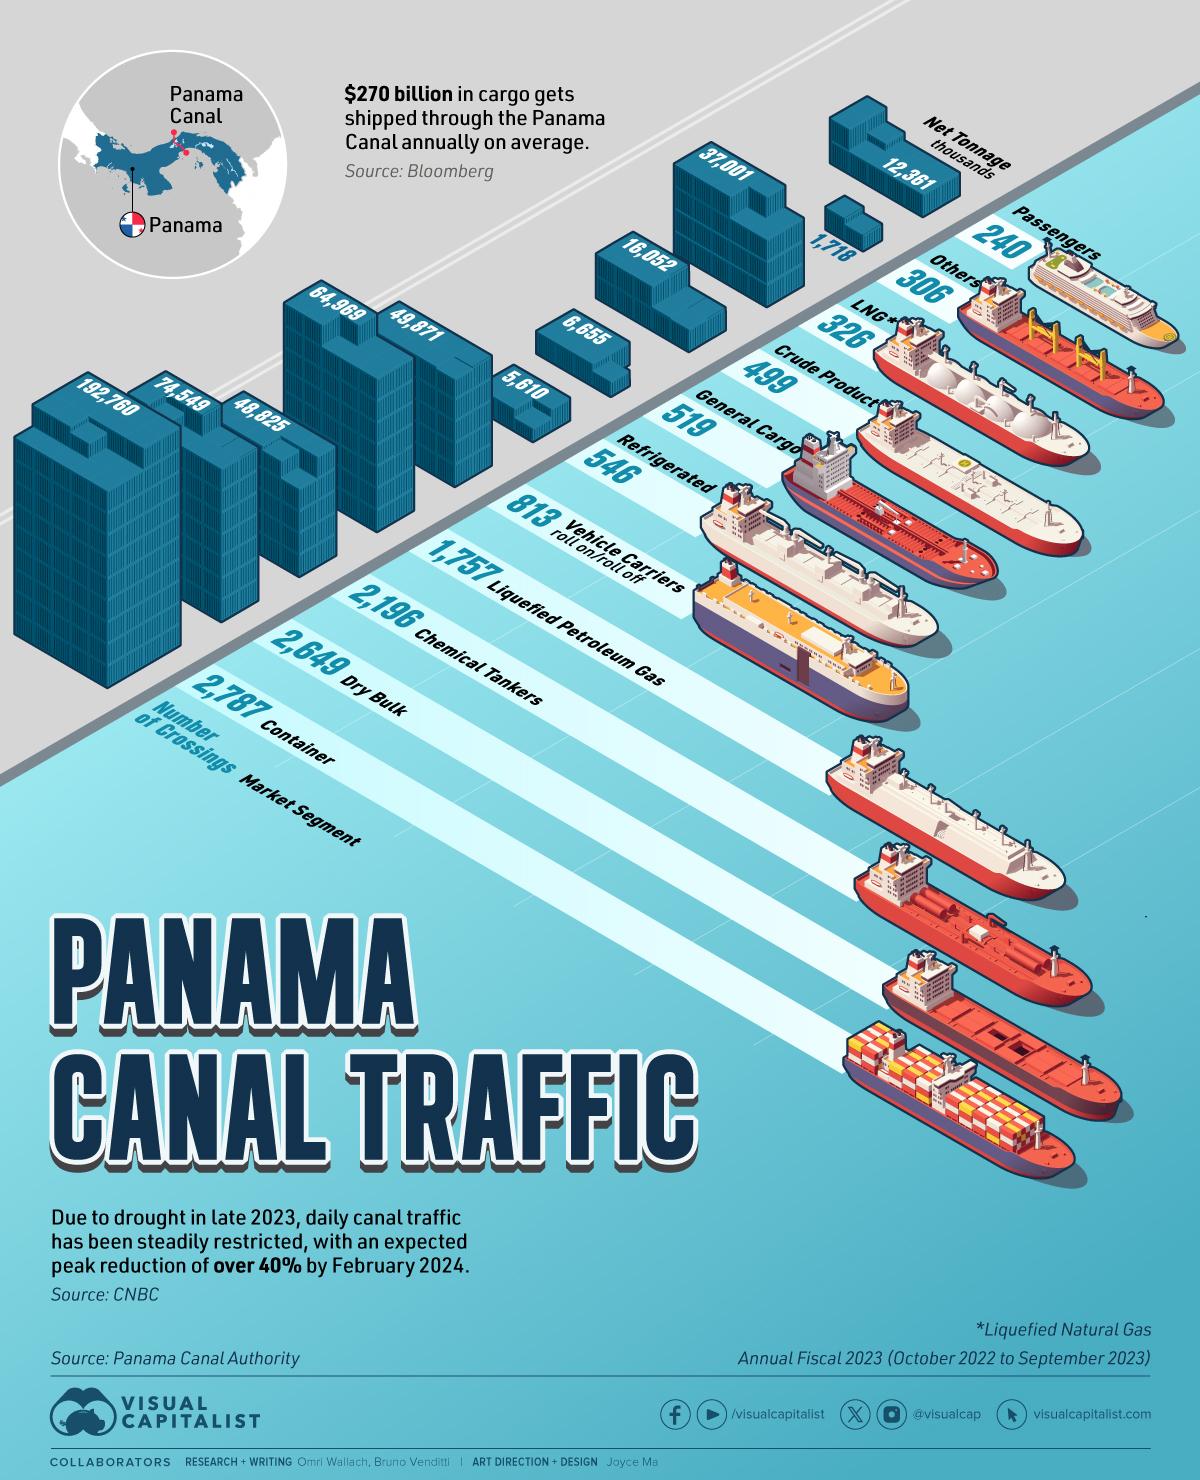 Panama Canal Traffic by Shipment Category and Tonnage